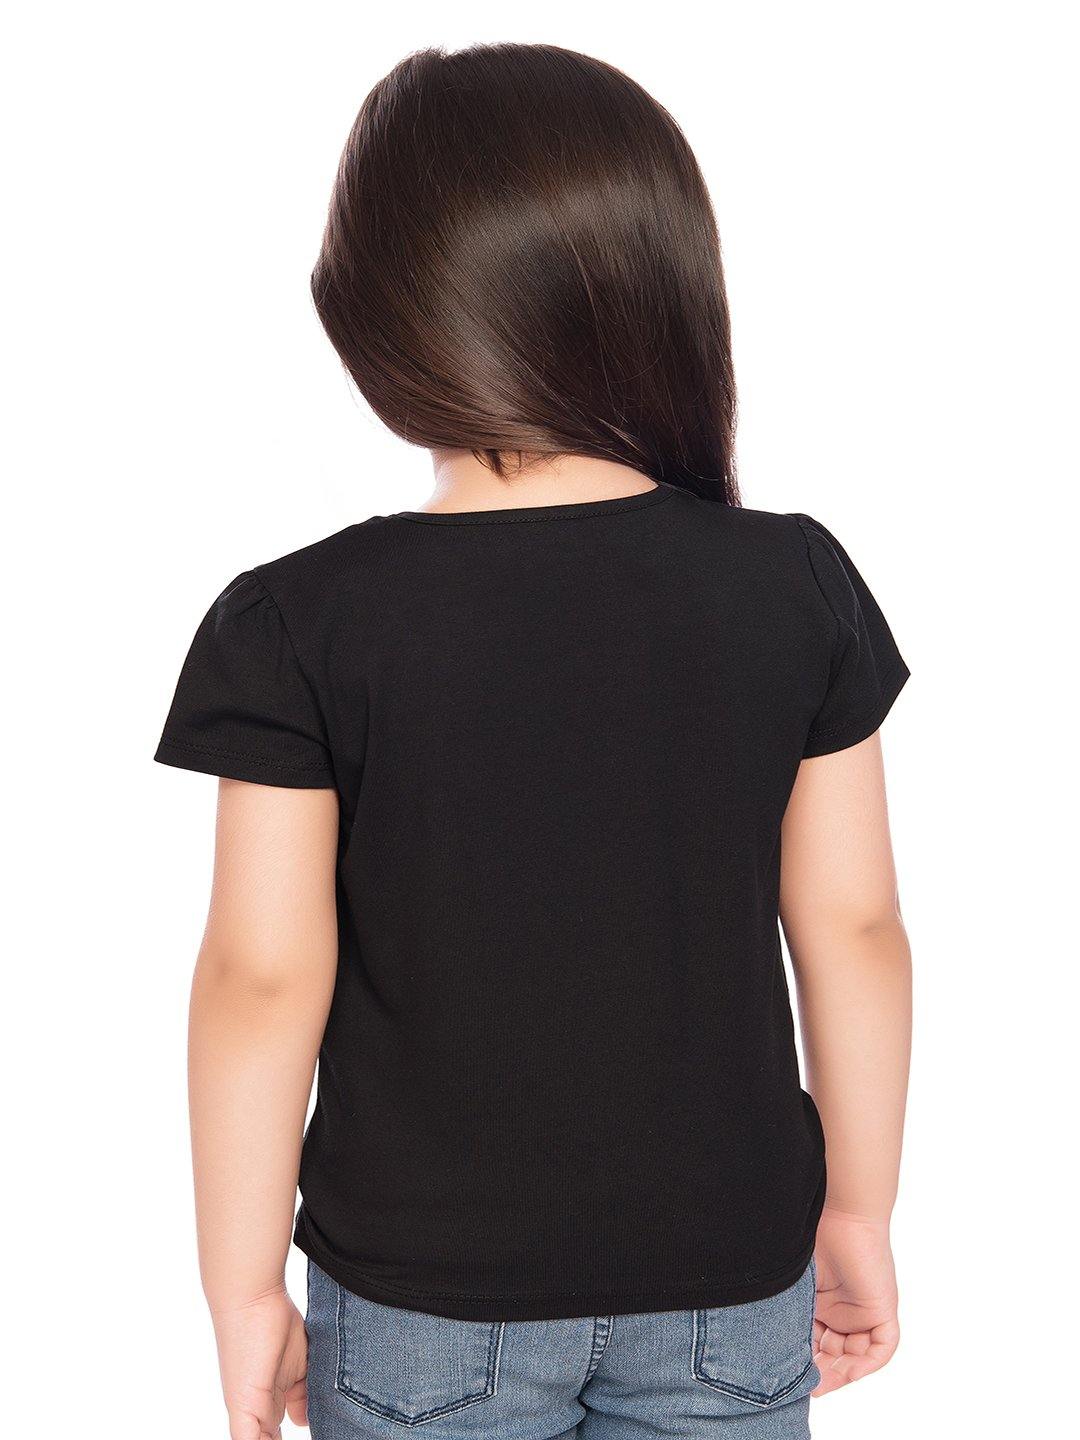 Tiny Baby Black Colored Top - T-111 Black - TINY BABY INDIA shop.tinybaby.in